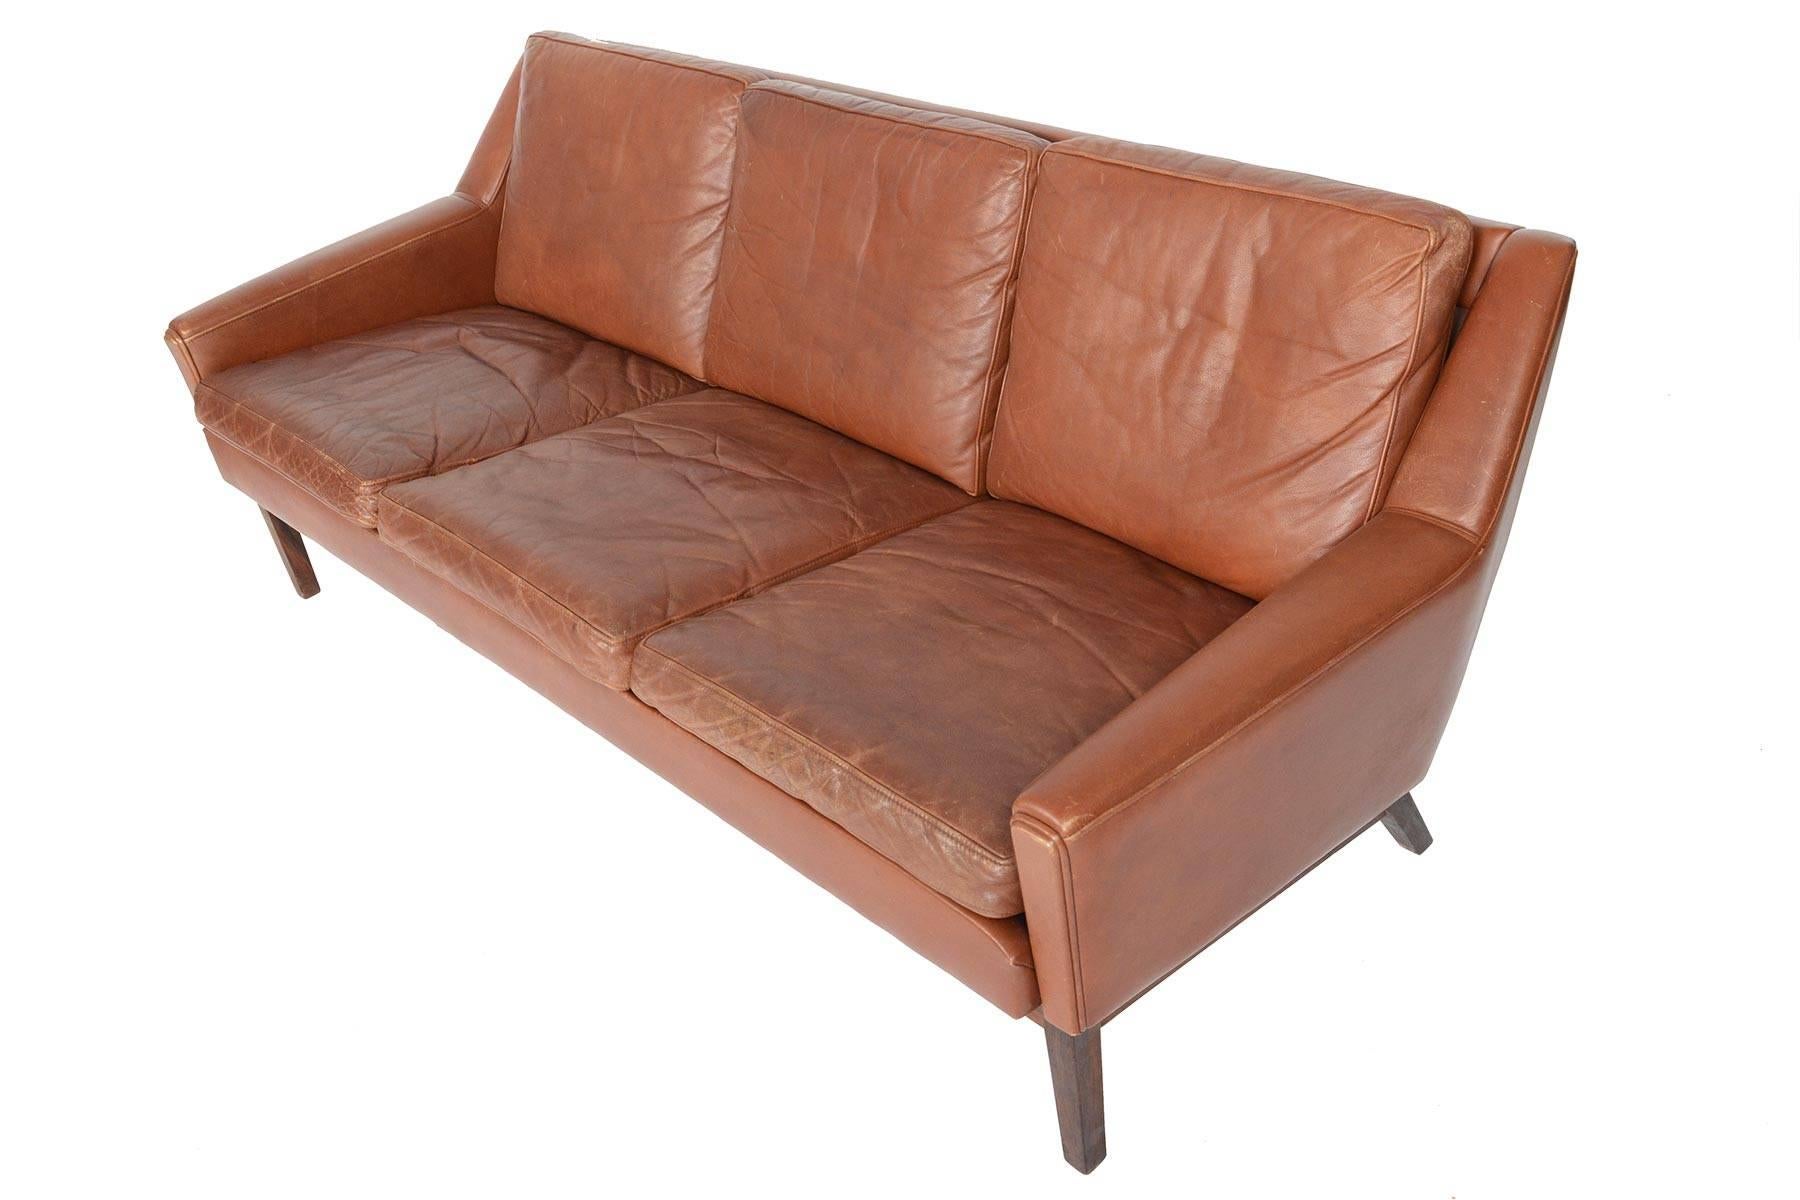 Mid-20th Century Danish Mid-Century Modern Sofa in Rosewood + Patinated Rust Leather